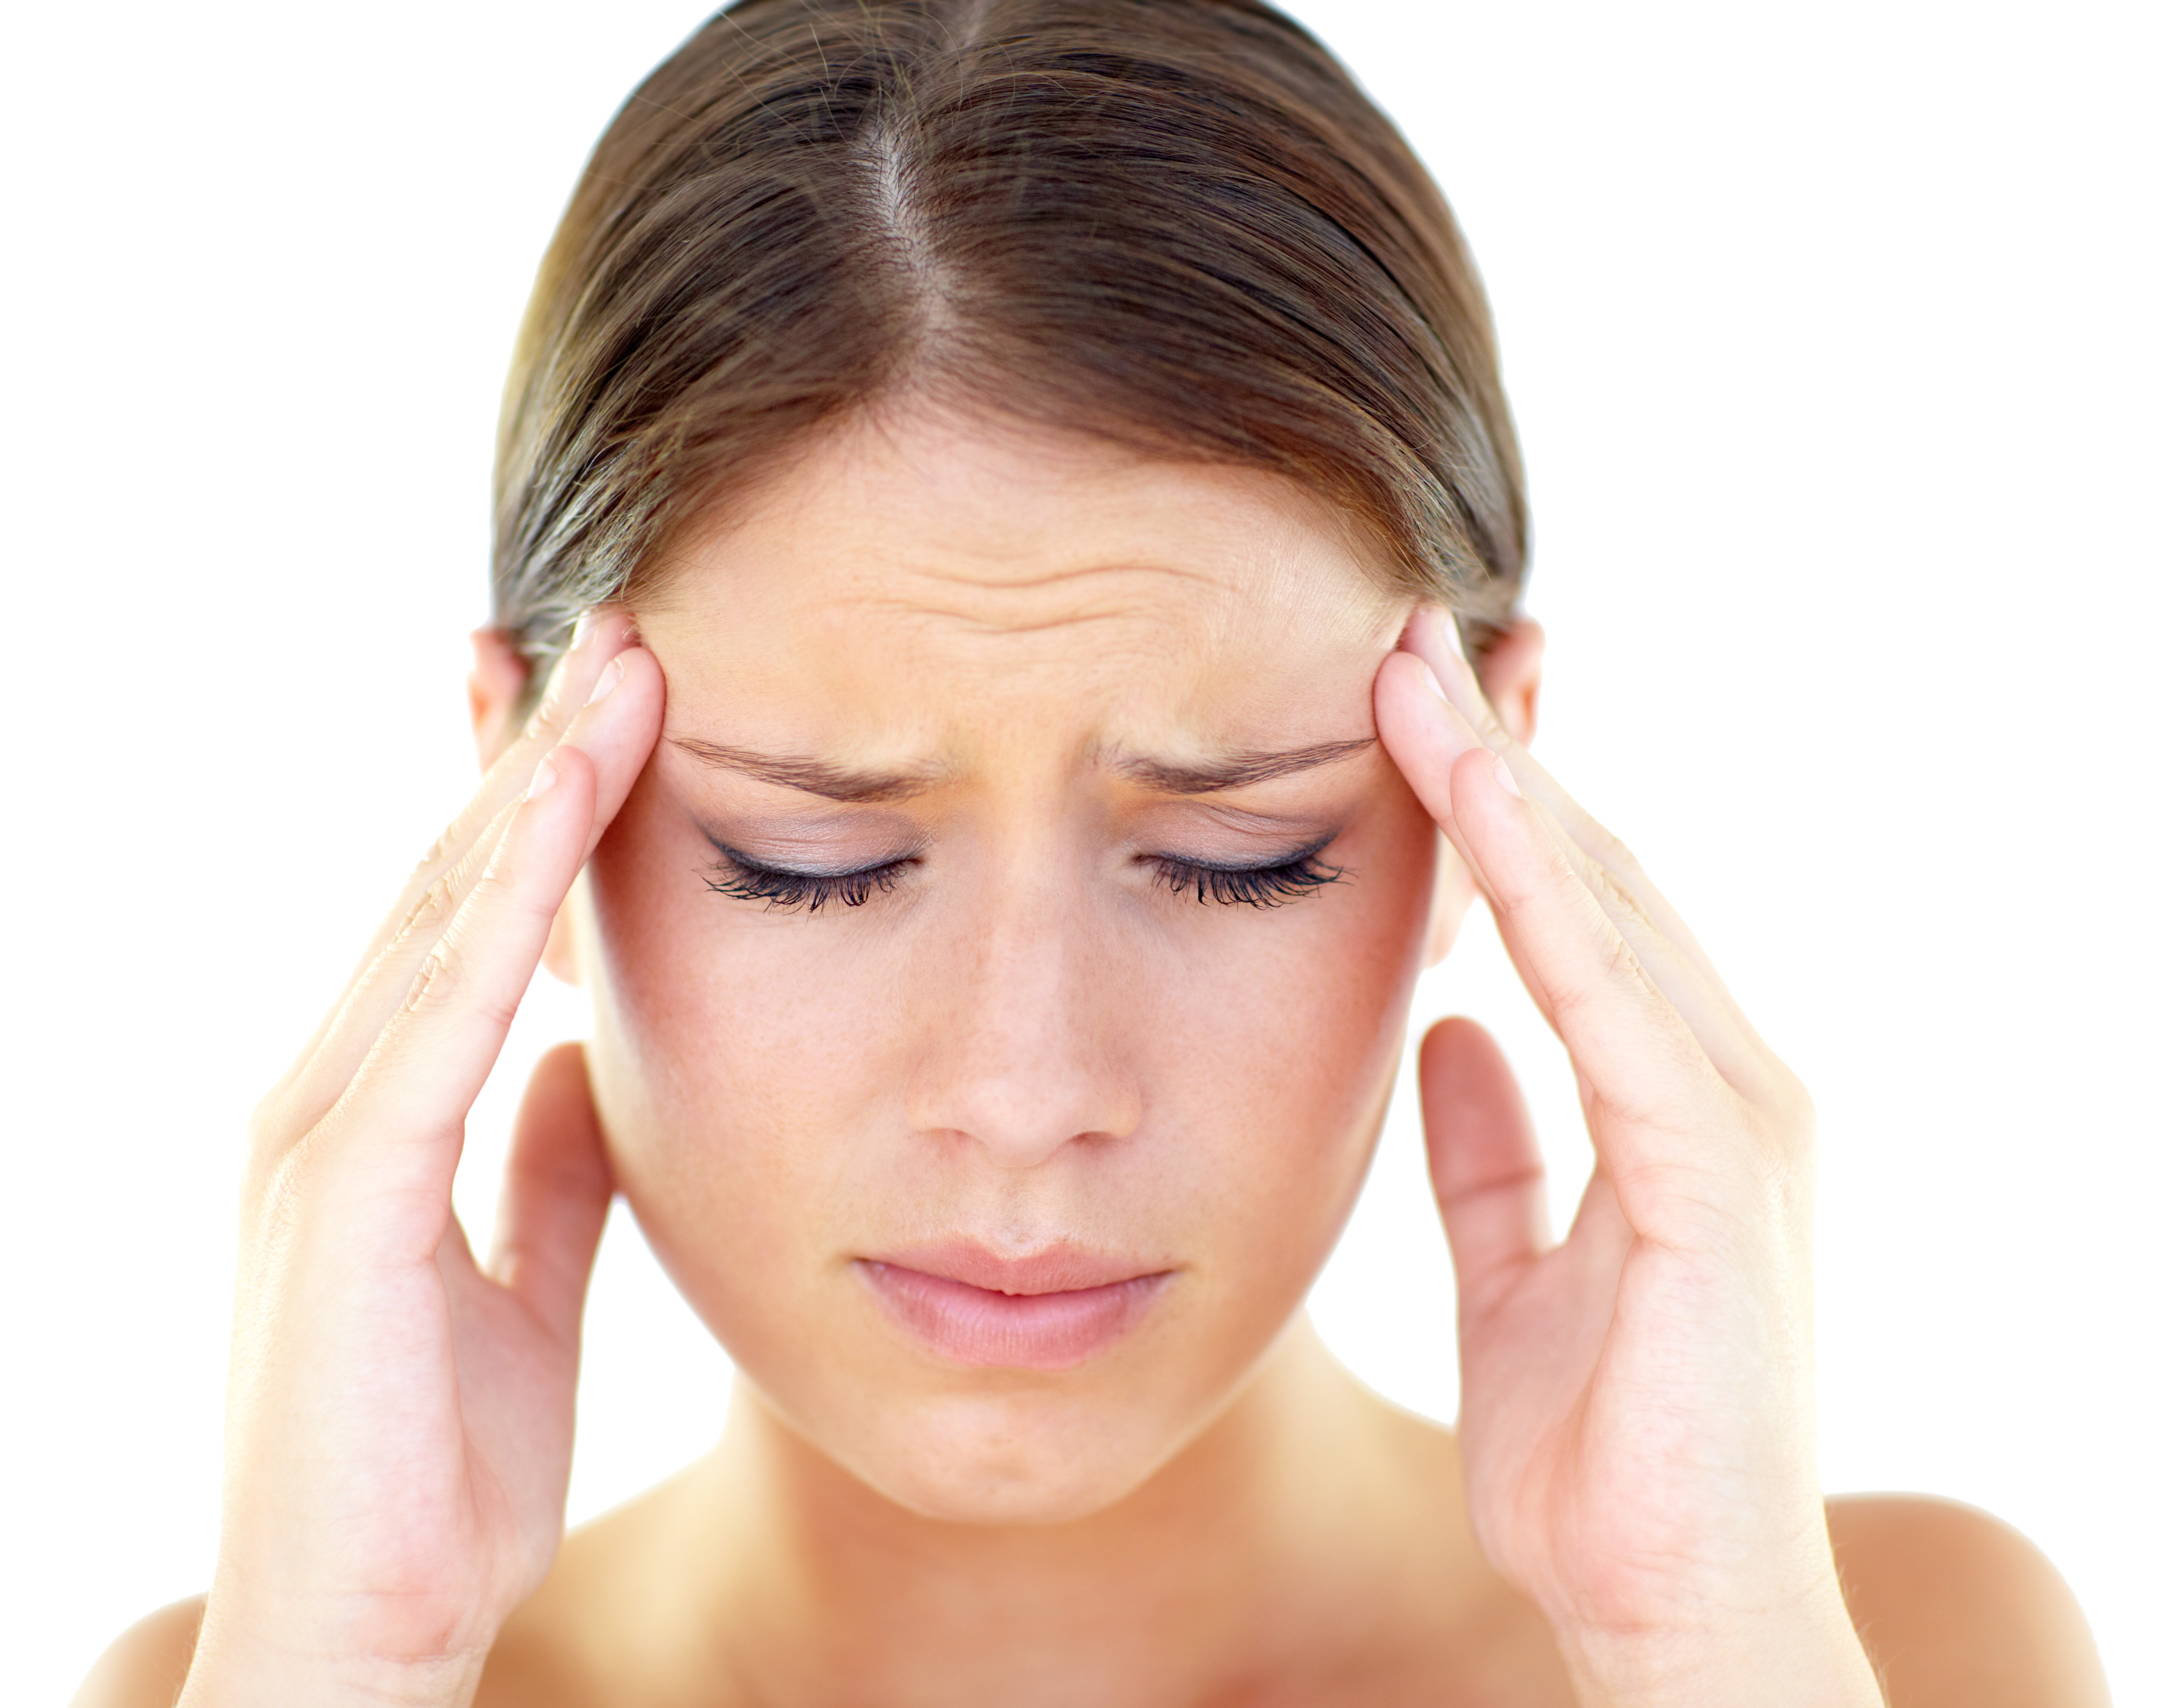 How To Get Rid Of Ocular Migraines Fast